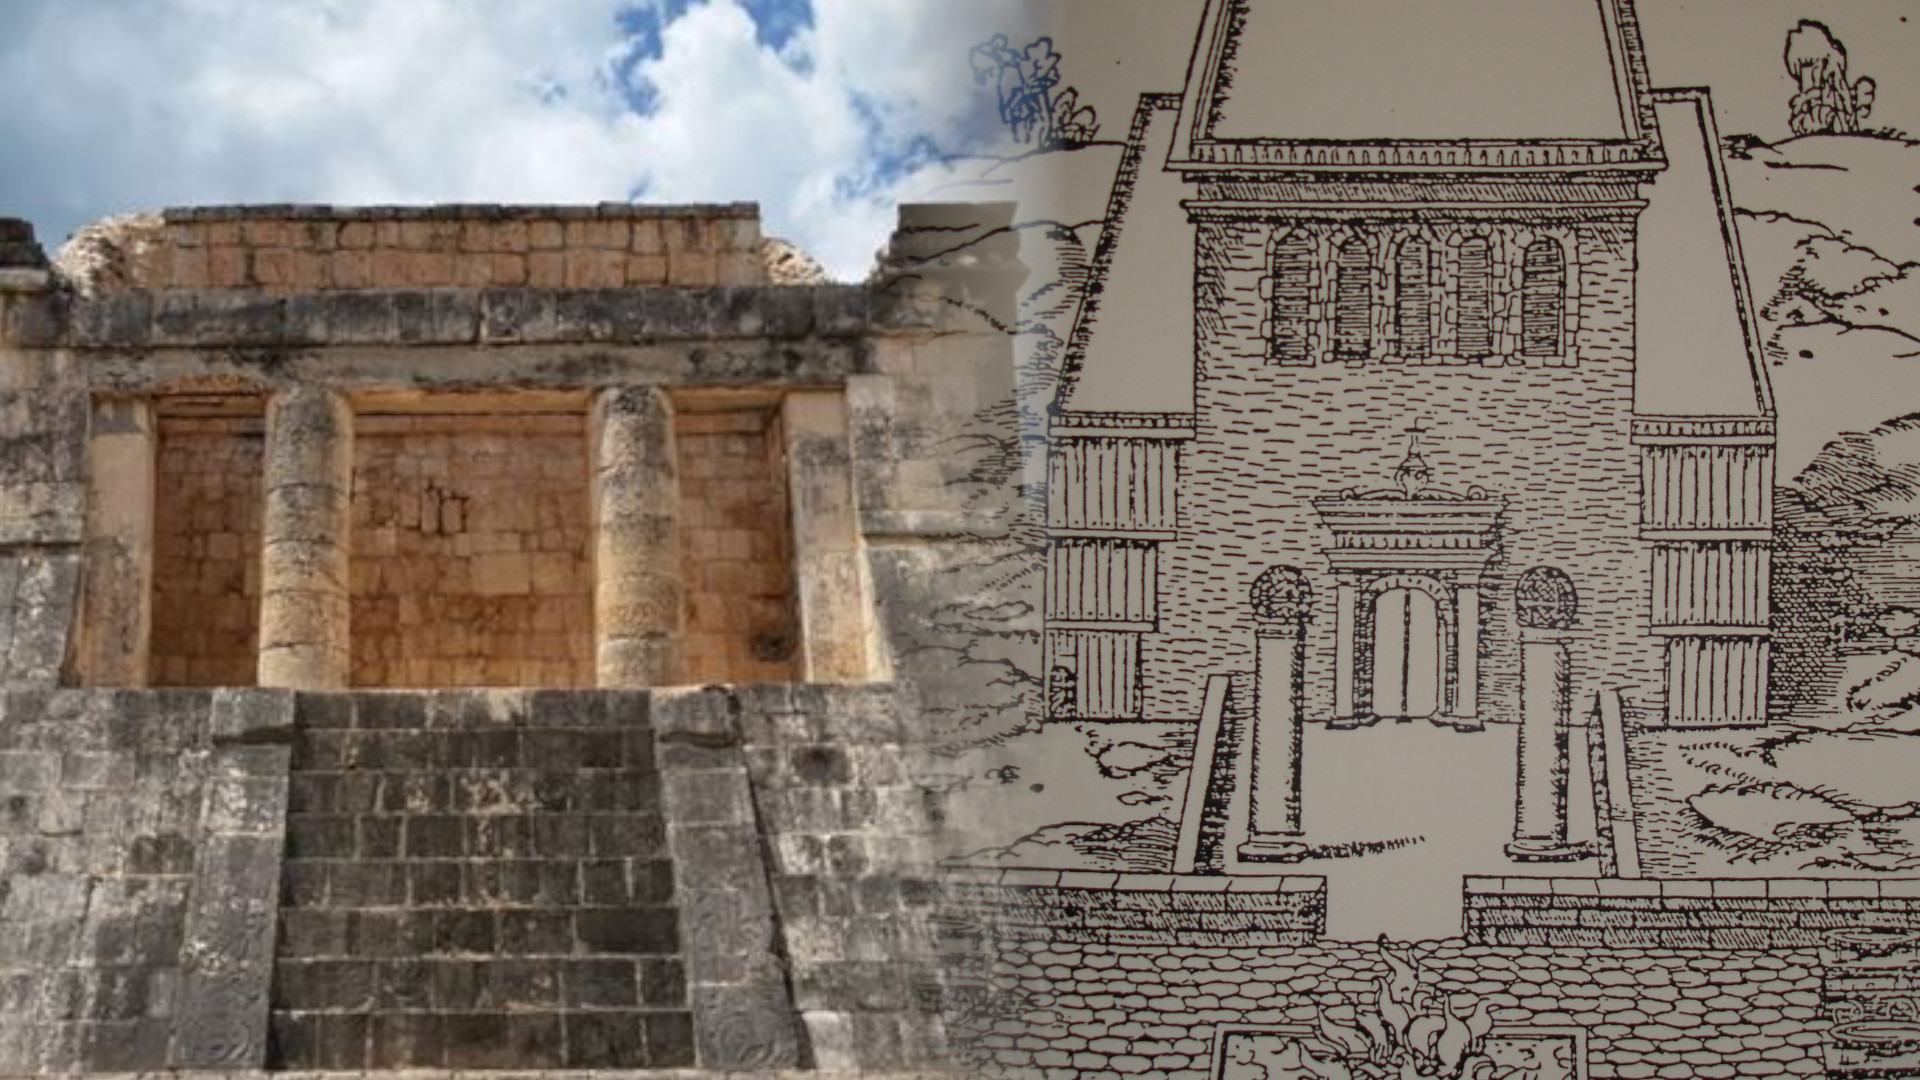 Collage of a photo of the Temple of the Bearded Man at Chichen Itza and a depiction of the temple of Solomon in Jerusalem by François Vatable.